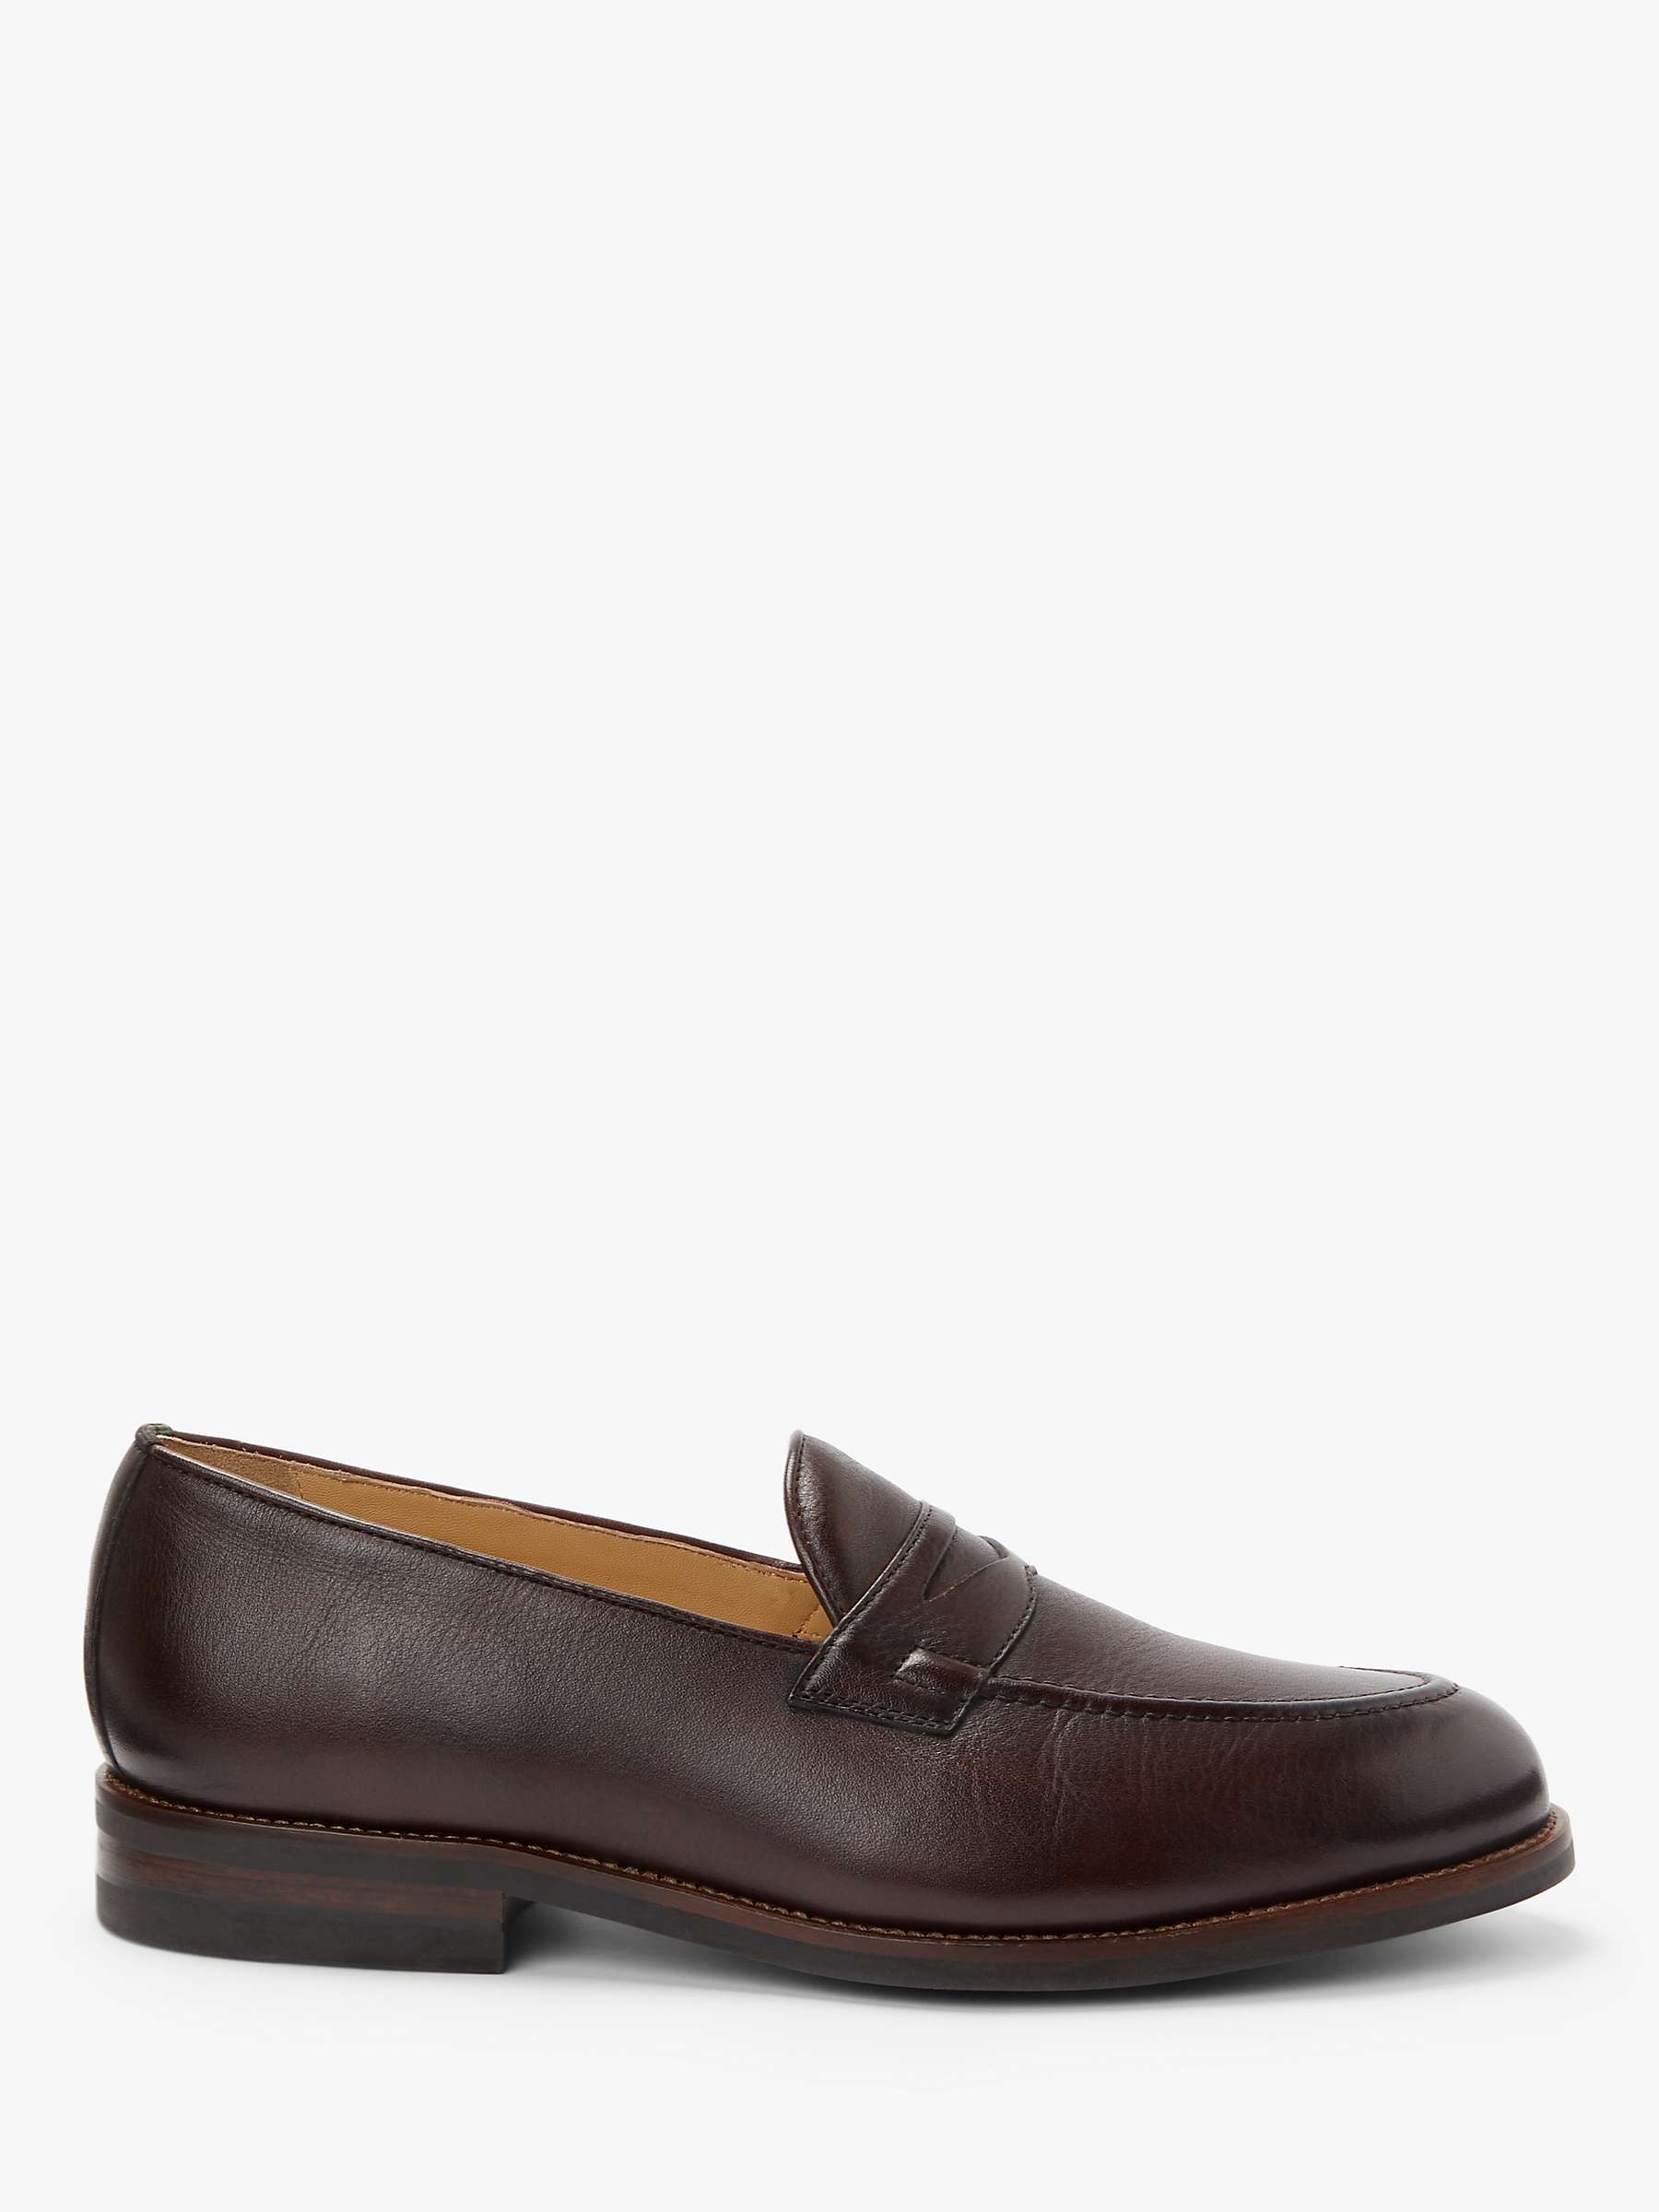 John Lewis Burlington Leather Penny Loafers, Red Choco at John Lewis ...